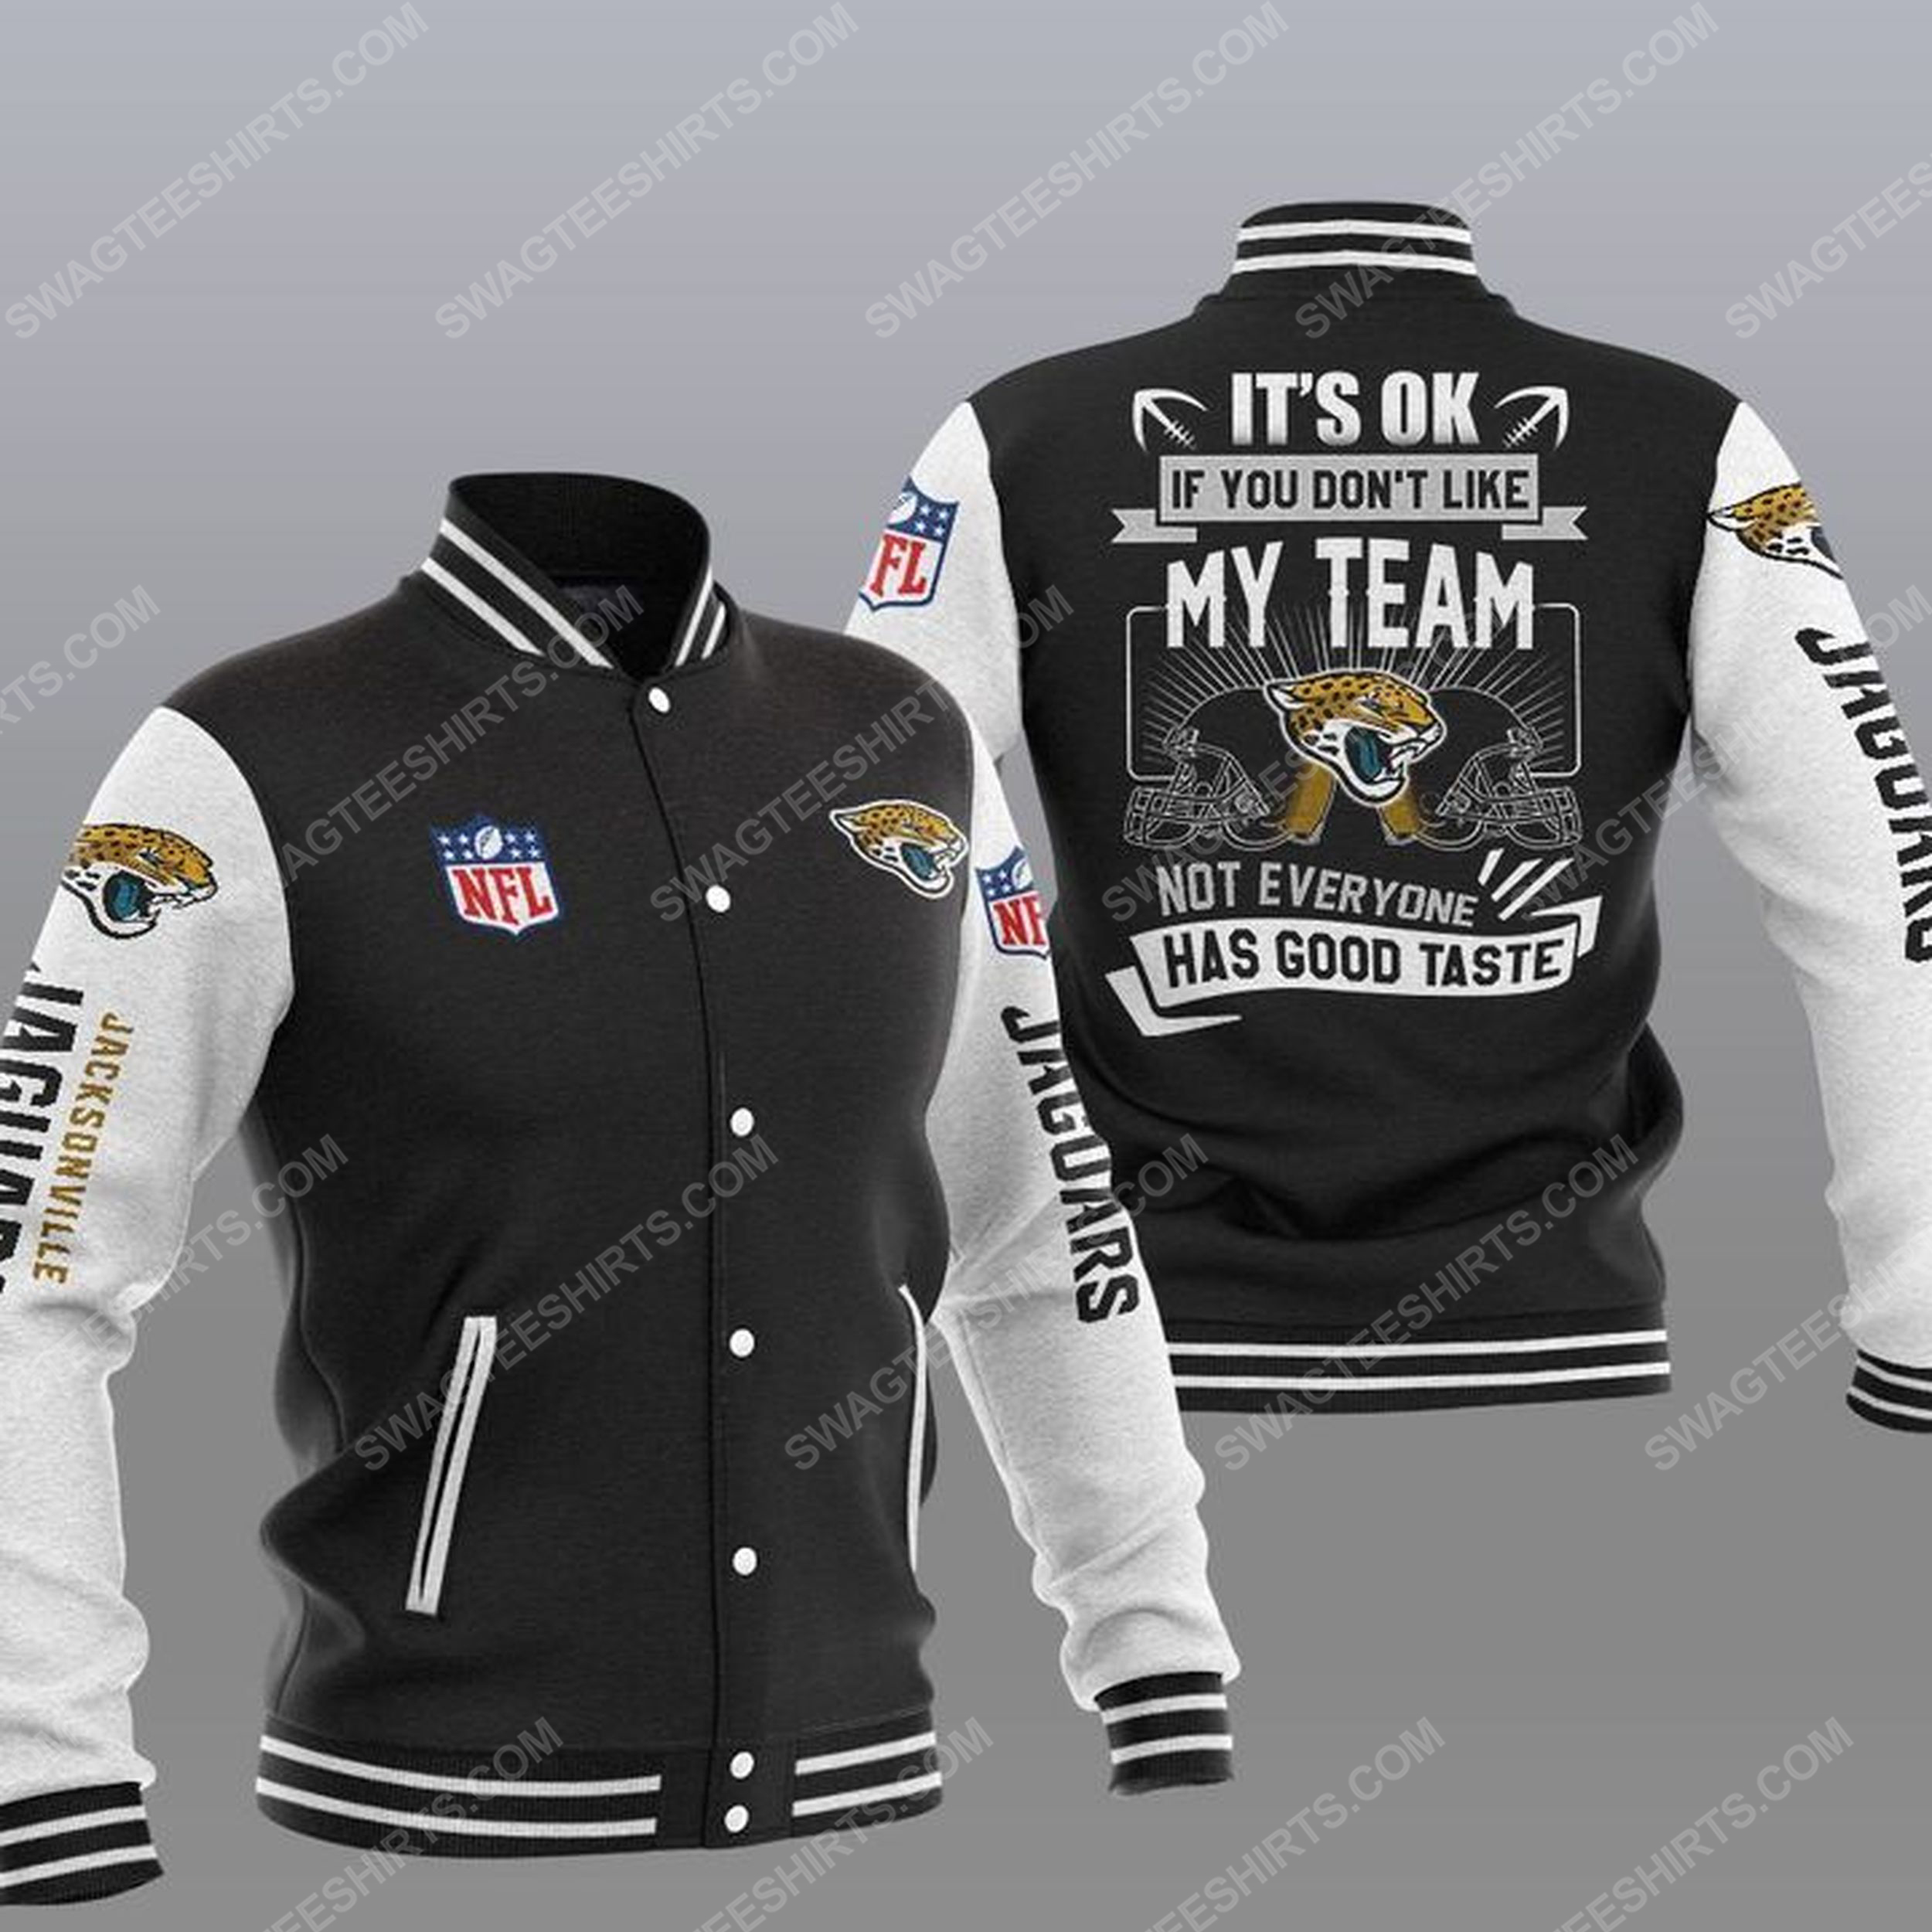 [special edition] It’s ok if you don’t like my team jacksonville jaguars all over print baseball jacket – maria